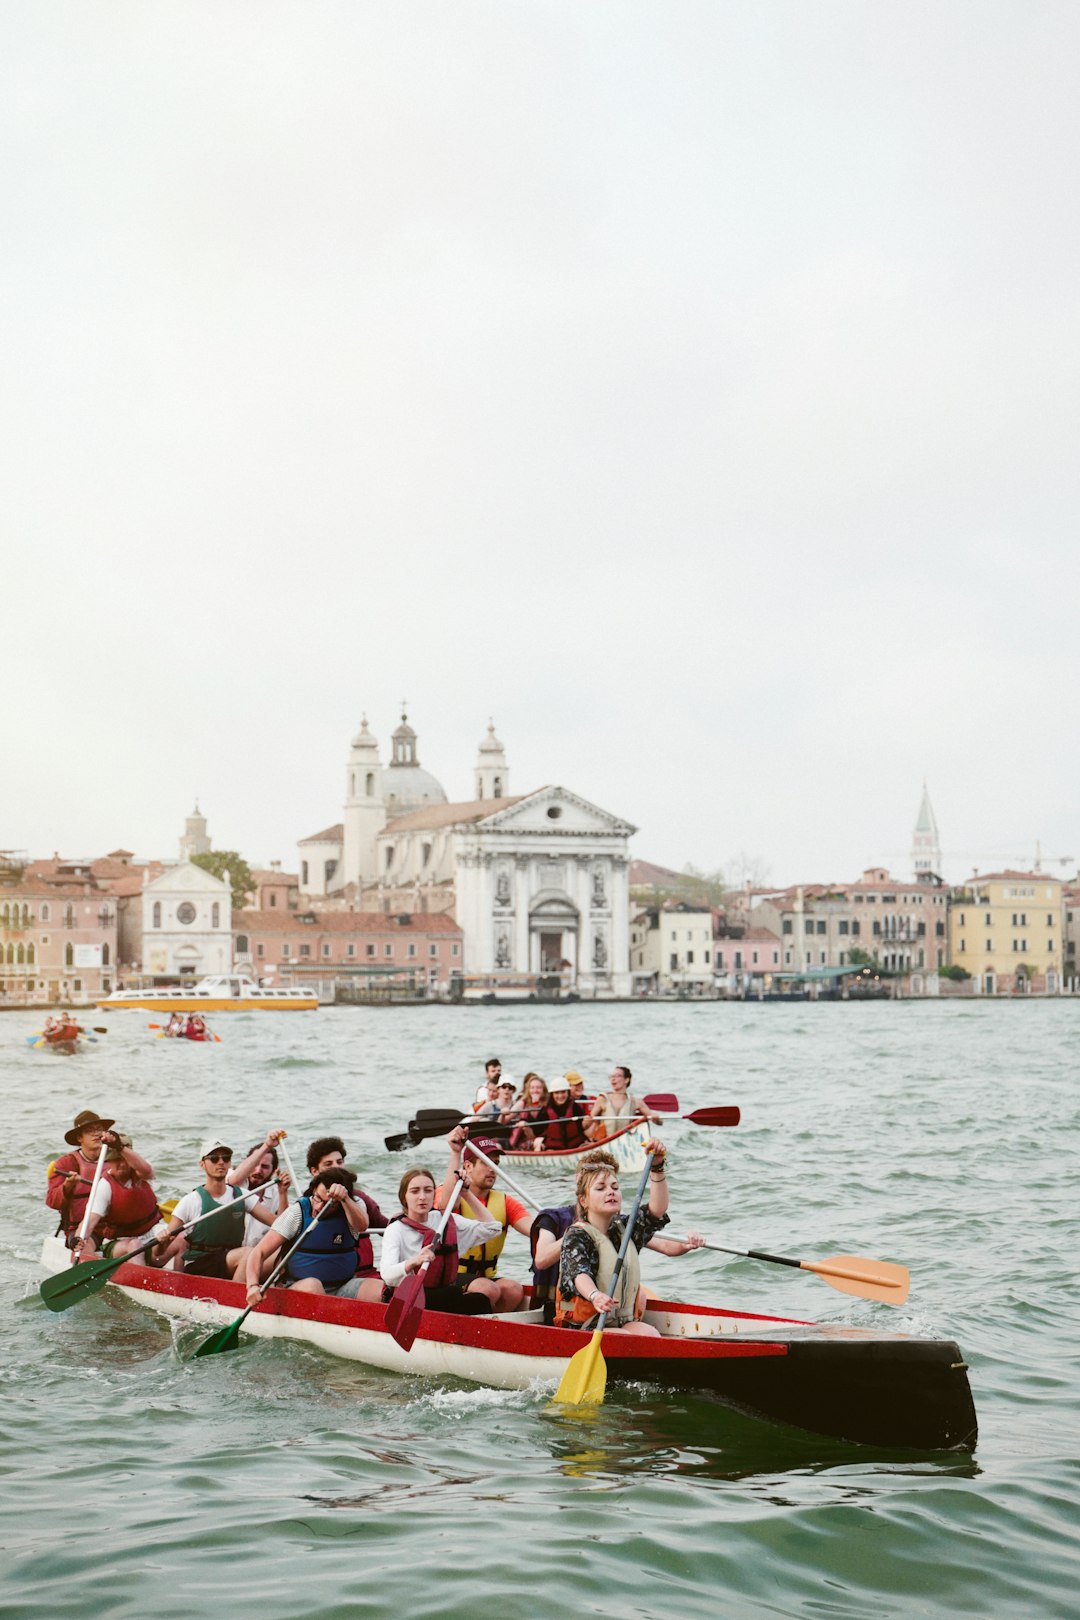 group of person riding on paddle boat